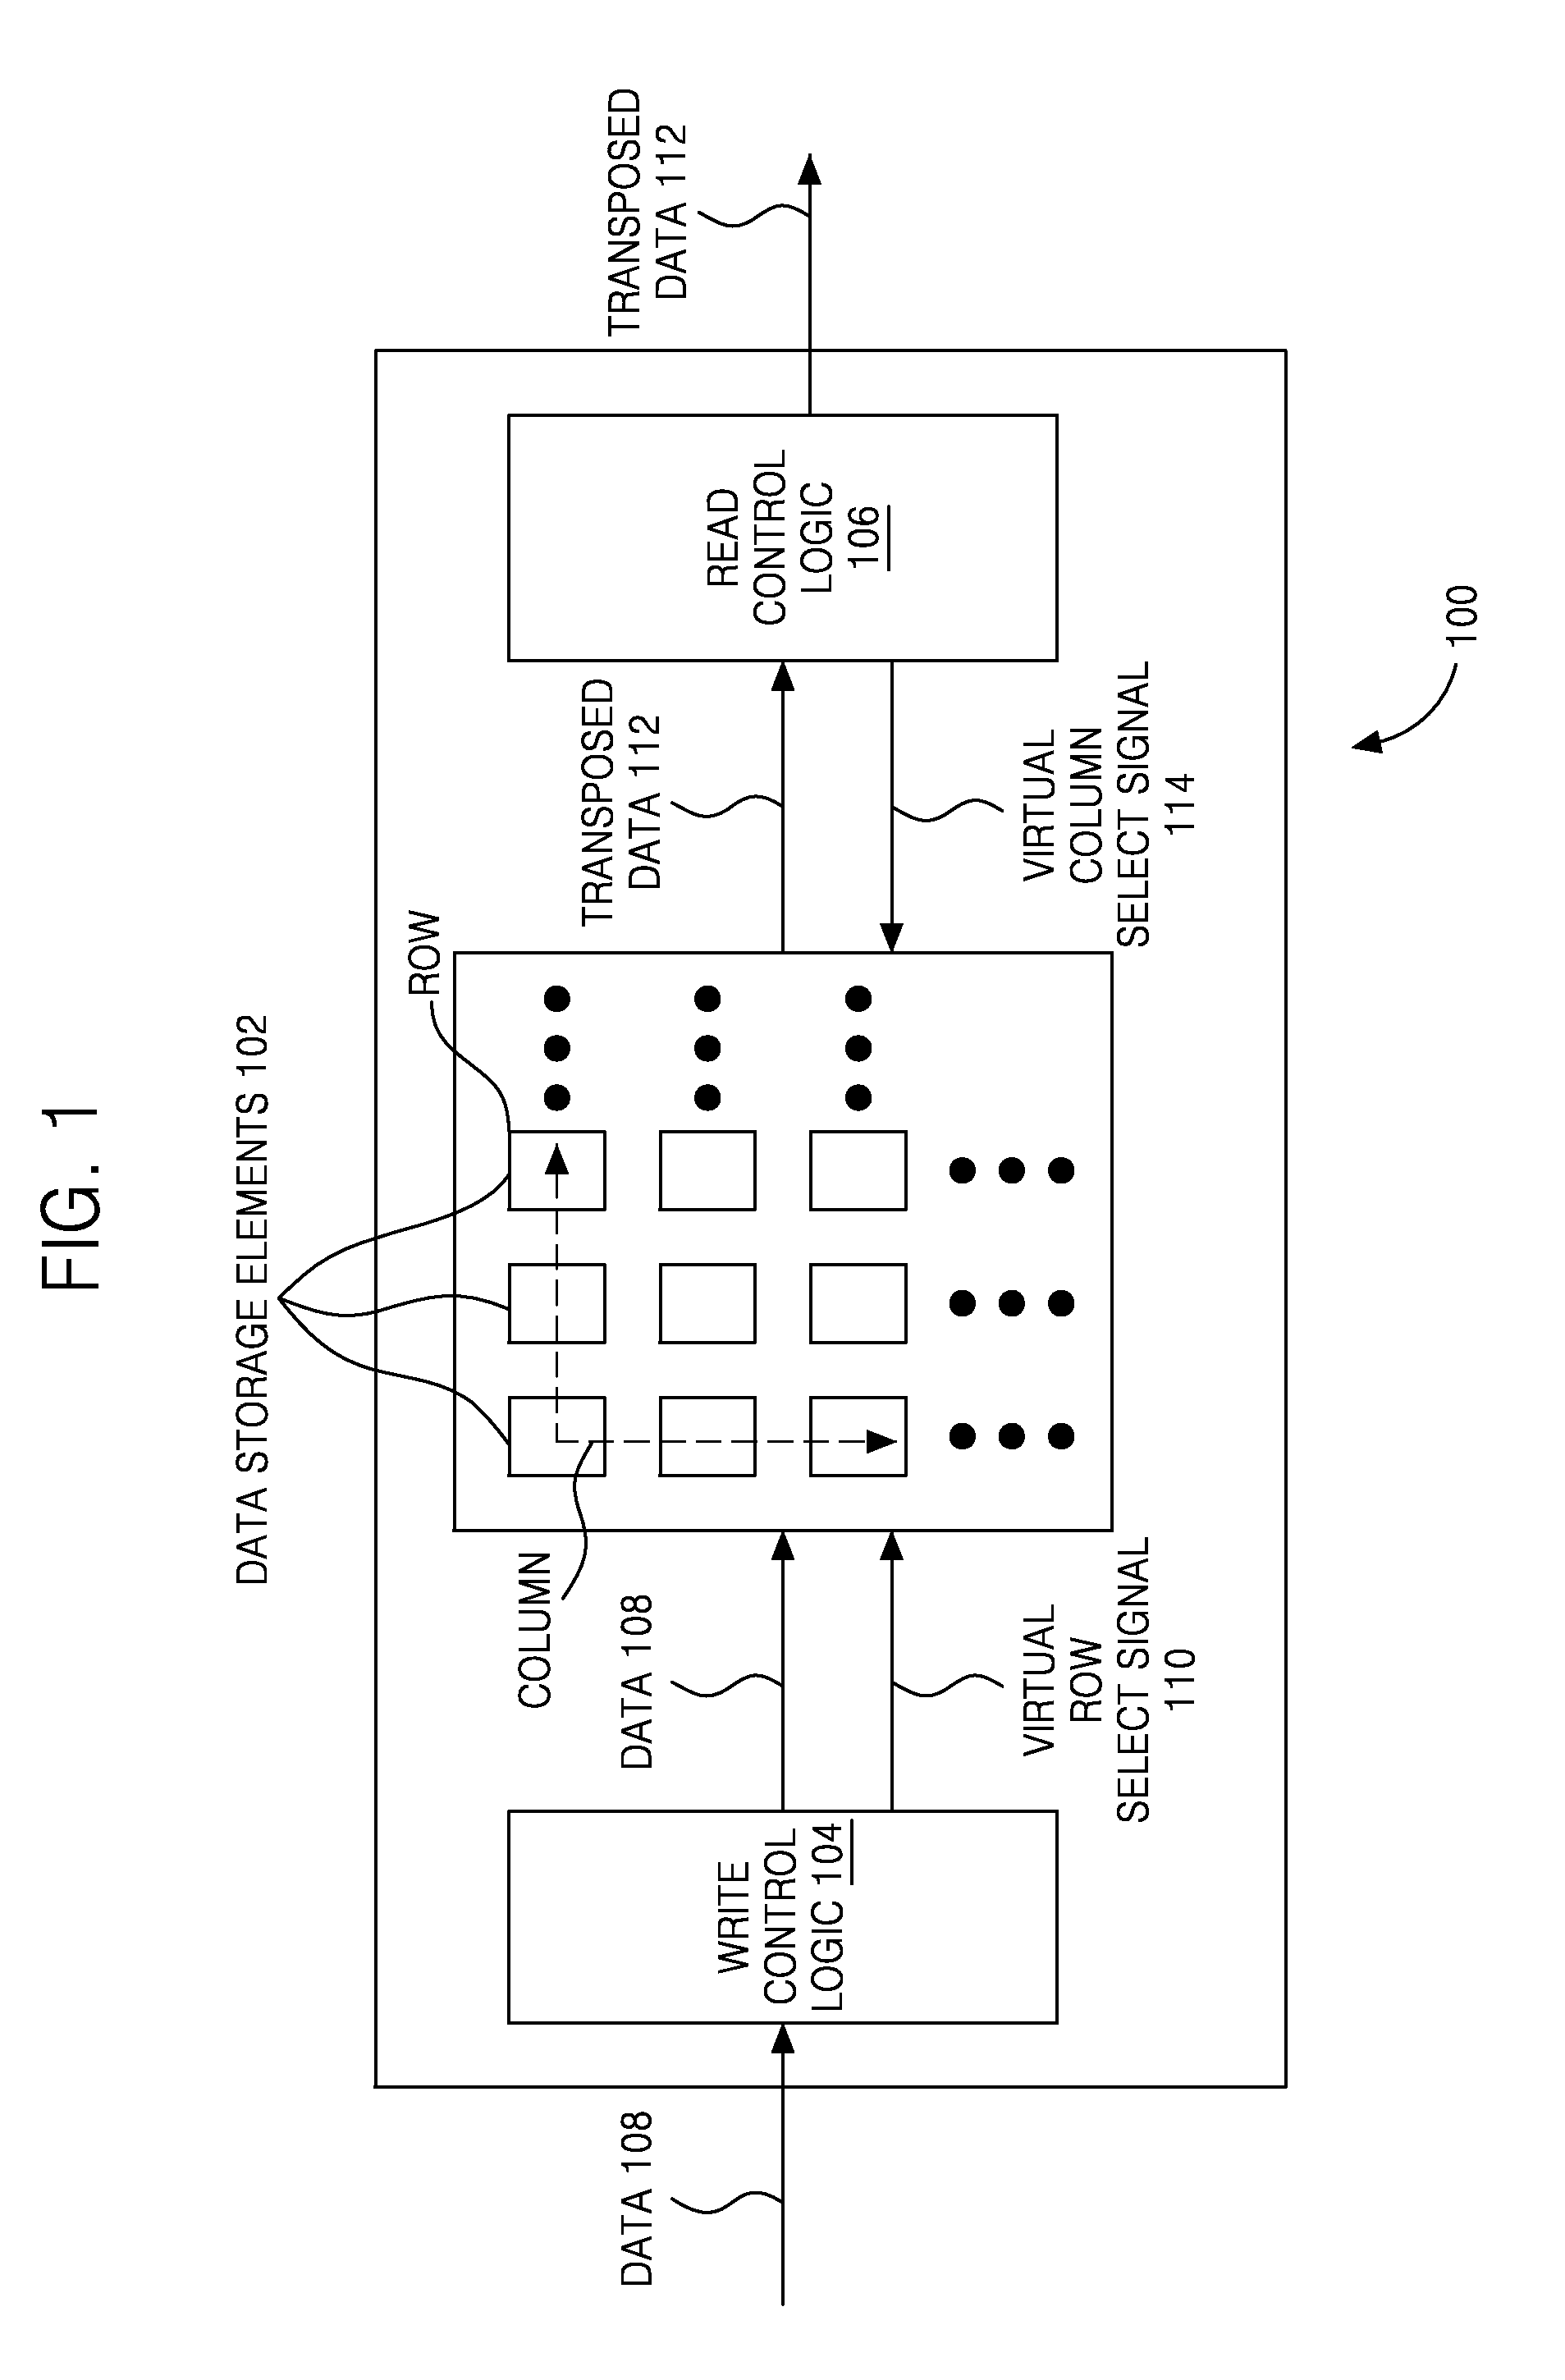 System and method for successive matrix transposes